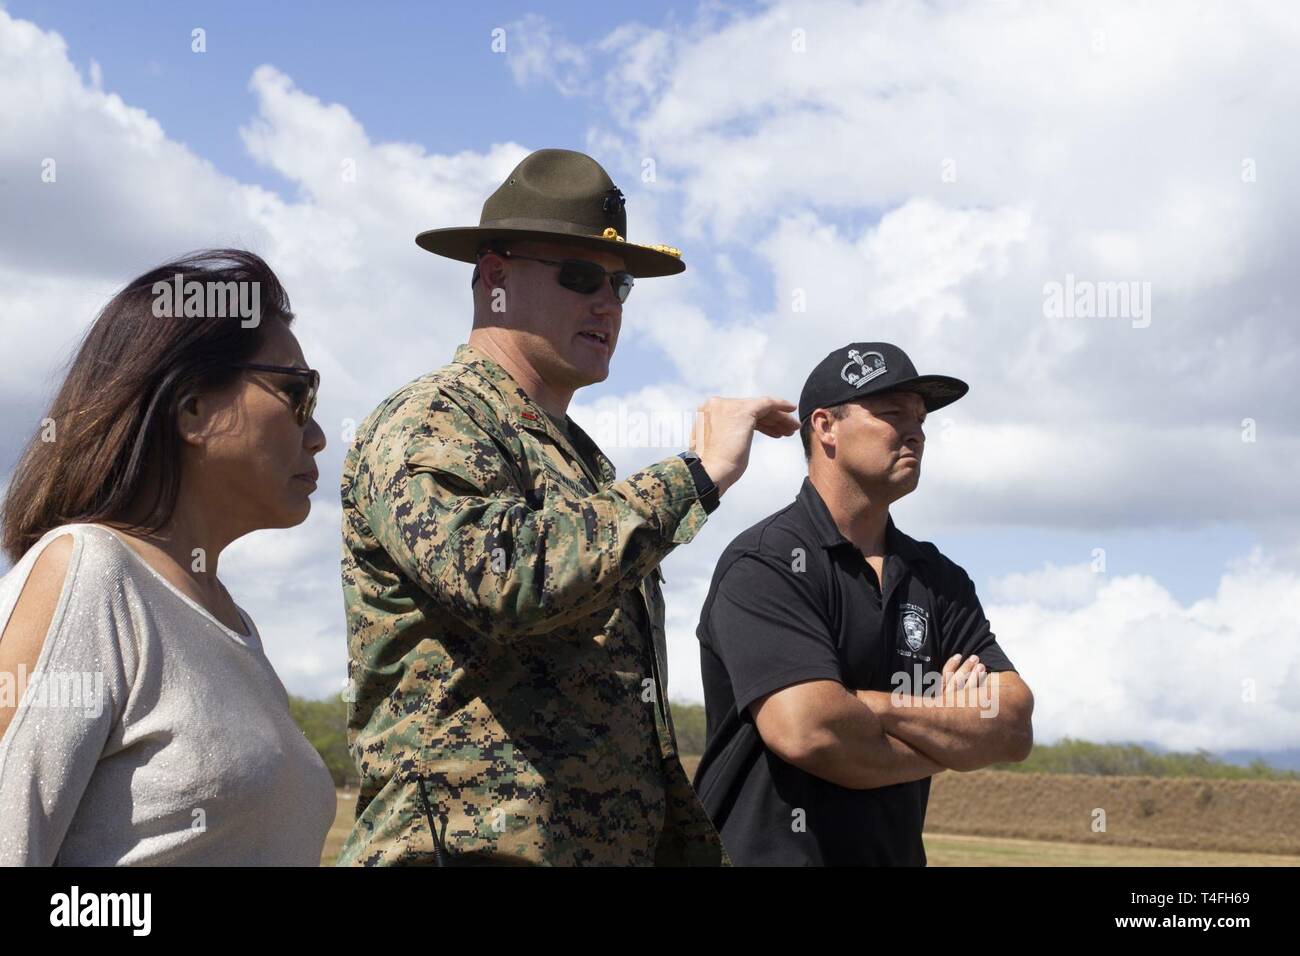 U.S. Marine Corps Chief Warrant Officer 2 Jeffrey Wright, center, officer in charge of Pu’uloa Range Training Facility, leads a tour of the grounds for Rep. Rida Arakawa, left, of Hawaii's Ewa District and Mitchell Tynanes, right, Ewa Neighborhood Board Chair, Marine Corps Base Hawaii (MCBH), Apr. 8, 2019. During the visit, MCBH leadership discussed and showcased Marine Corps marksmanship training, community partnerships, and the positive economic impact from MCBH facilities and service members. Stock Photo